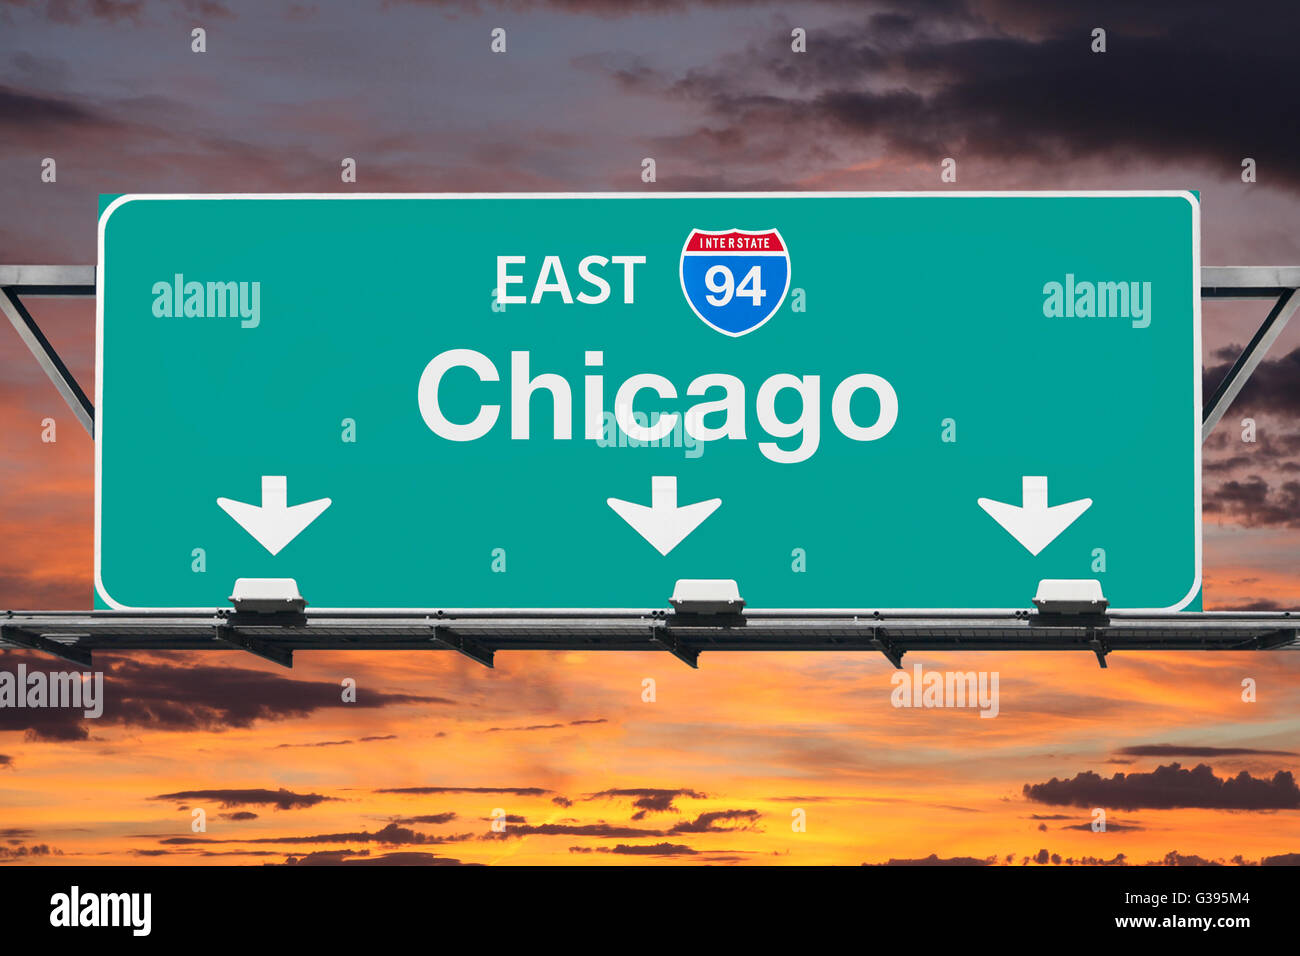 Chicago Interstate 94 east highway sign with sunrise sky. Stock Photo